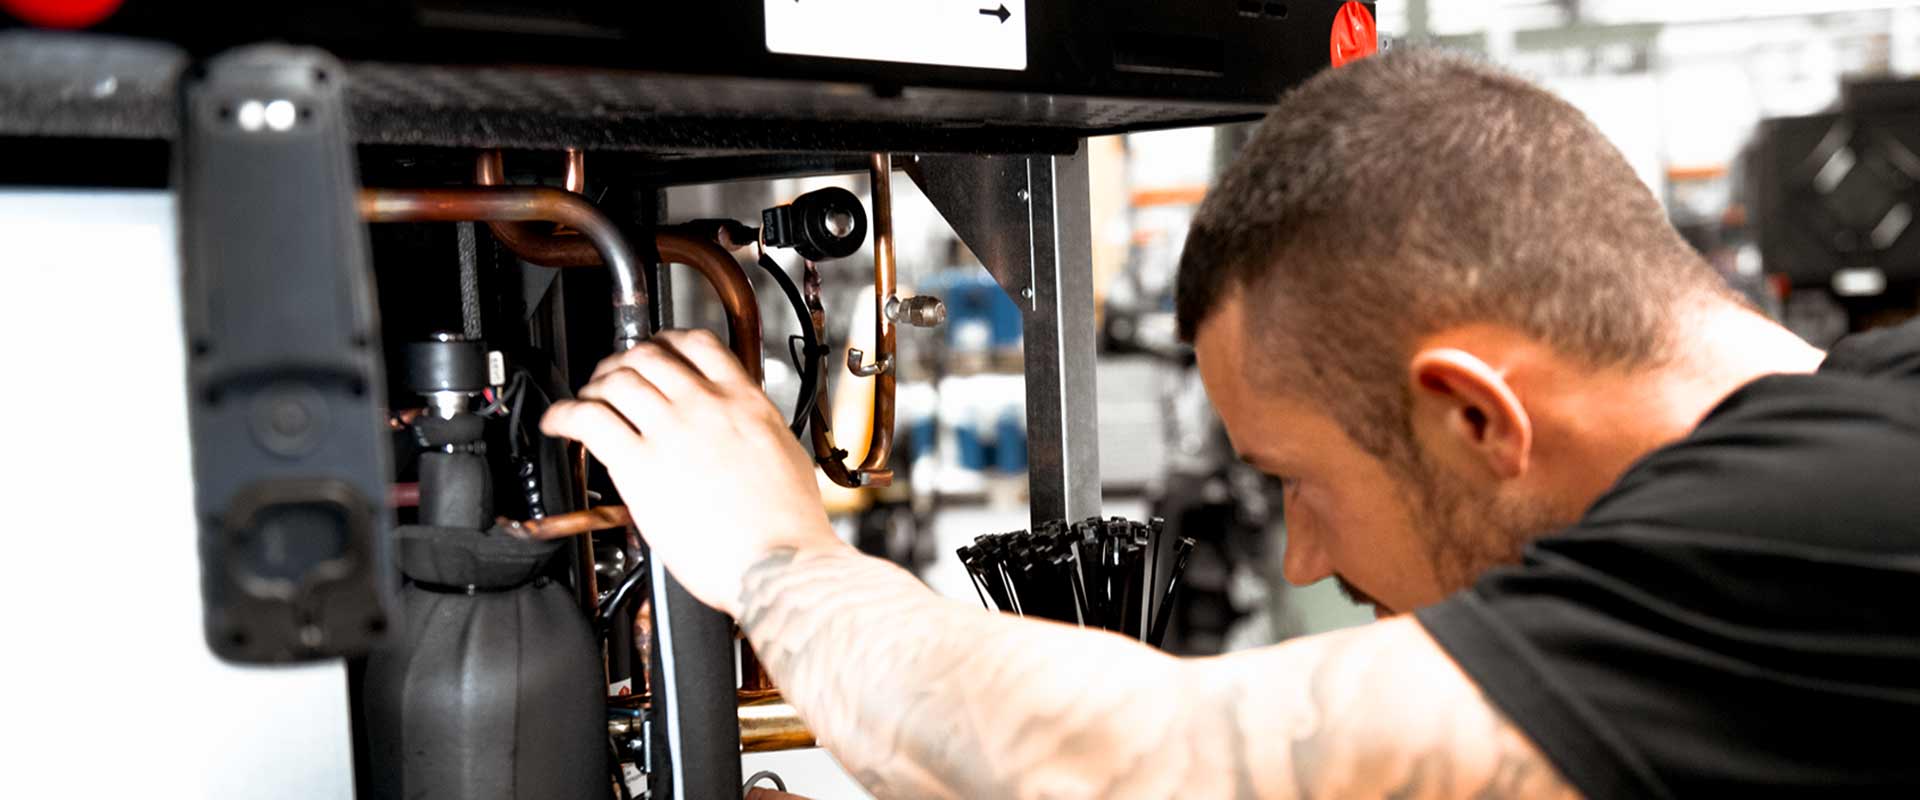 An employee can be seen in close-up while working on an open heat pump and adjusting the pipes inside.